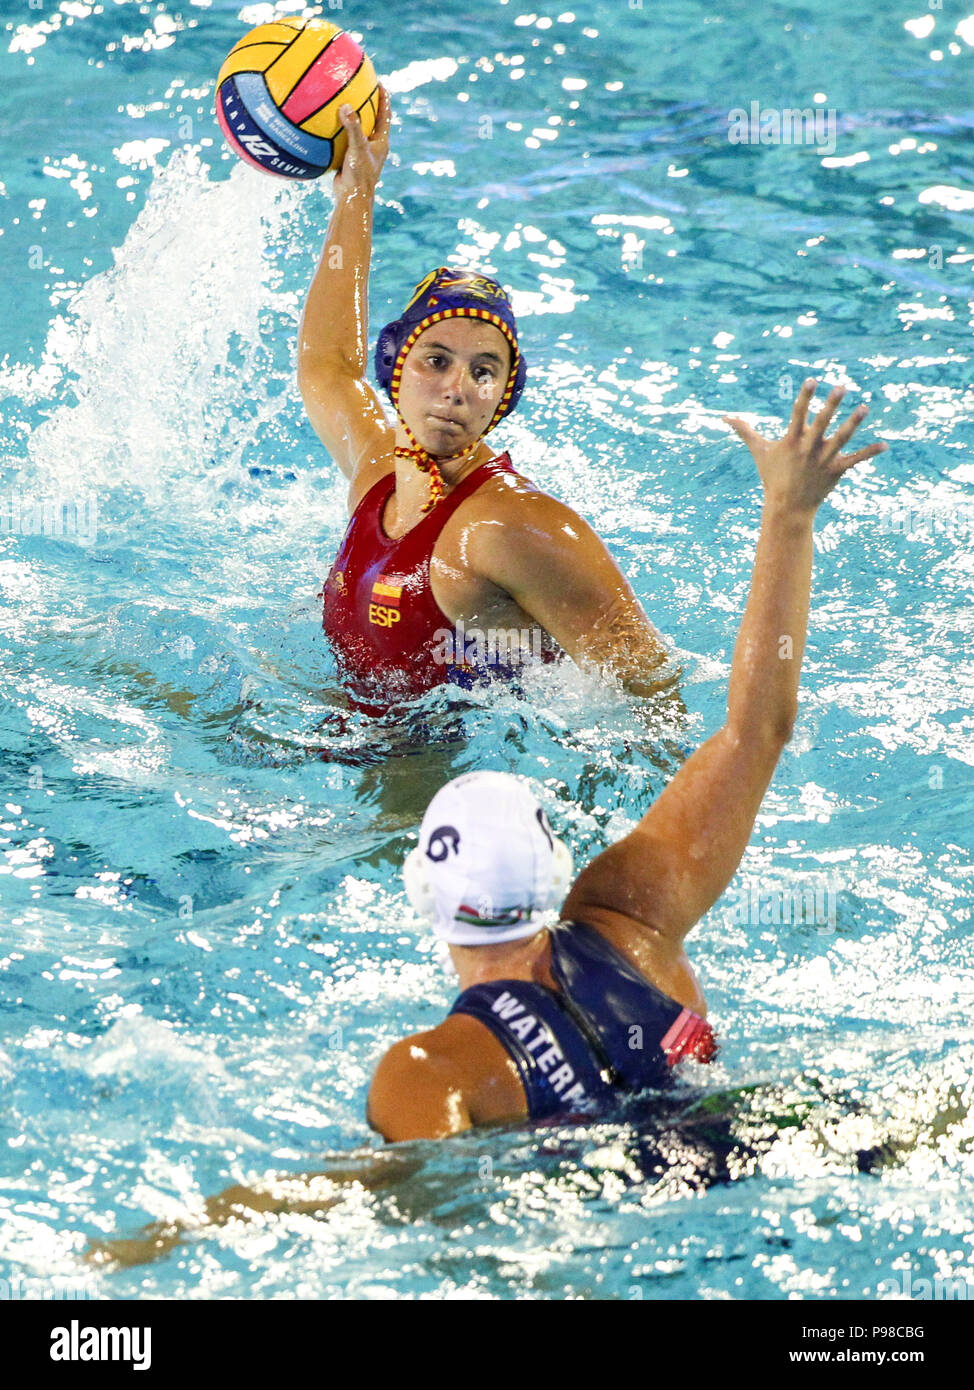 Bernat Picornell Pools, Barcelona, Spain. 27th July, 2018. 33rd European  Womens Water Polo Championships, 3rd place playoff, Spain versus Hungary;  Spanish team celebrate after winning 3rd in the European Championship  Credit: Action